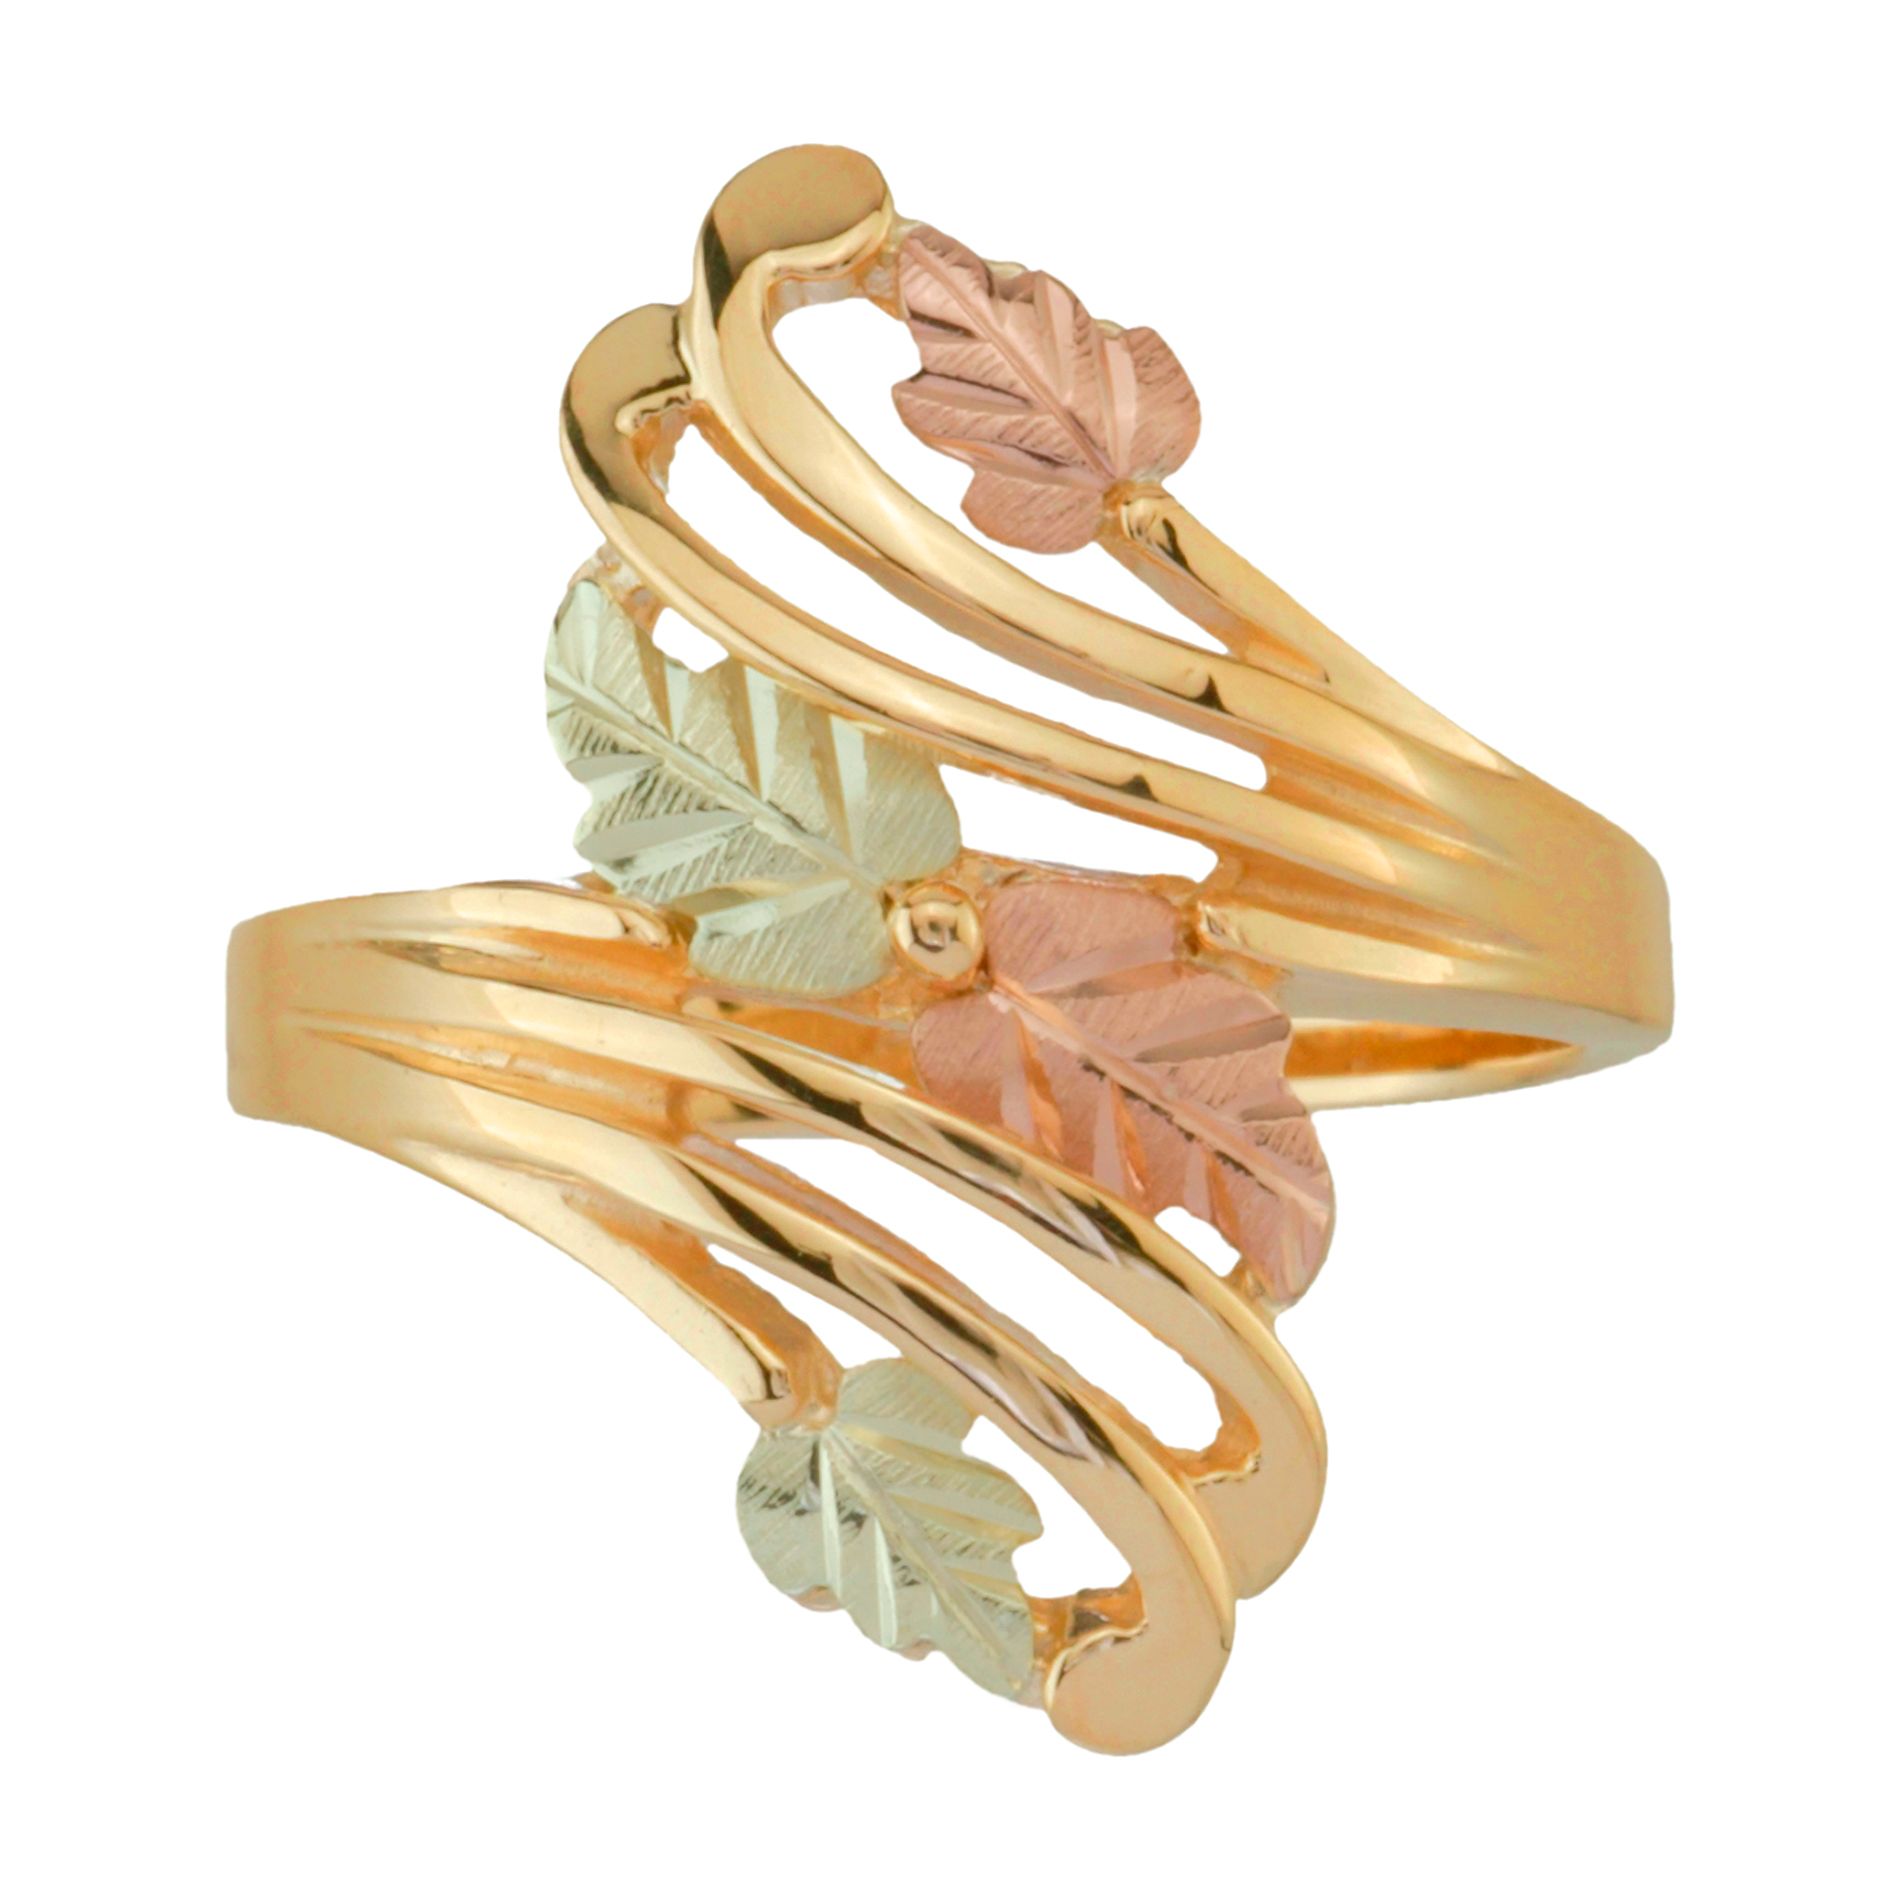 Tricolor 10K Gold Ladies' Elongated Ring